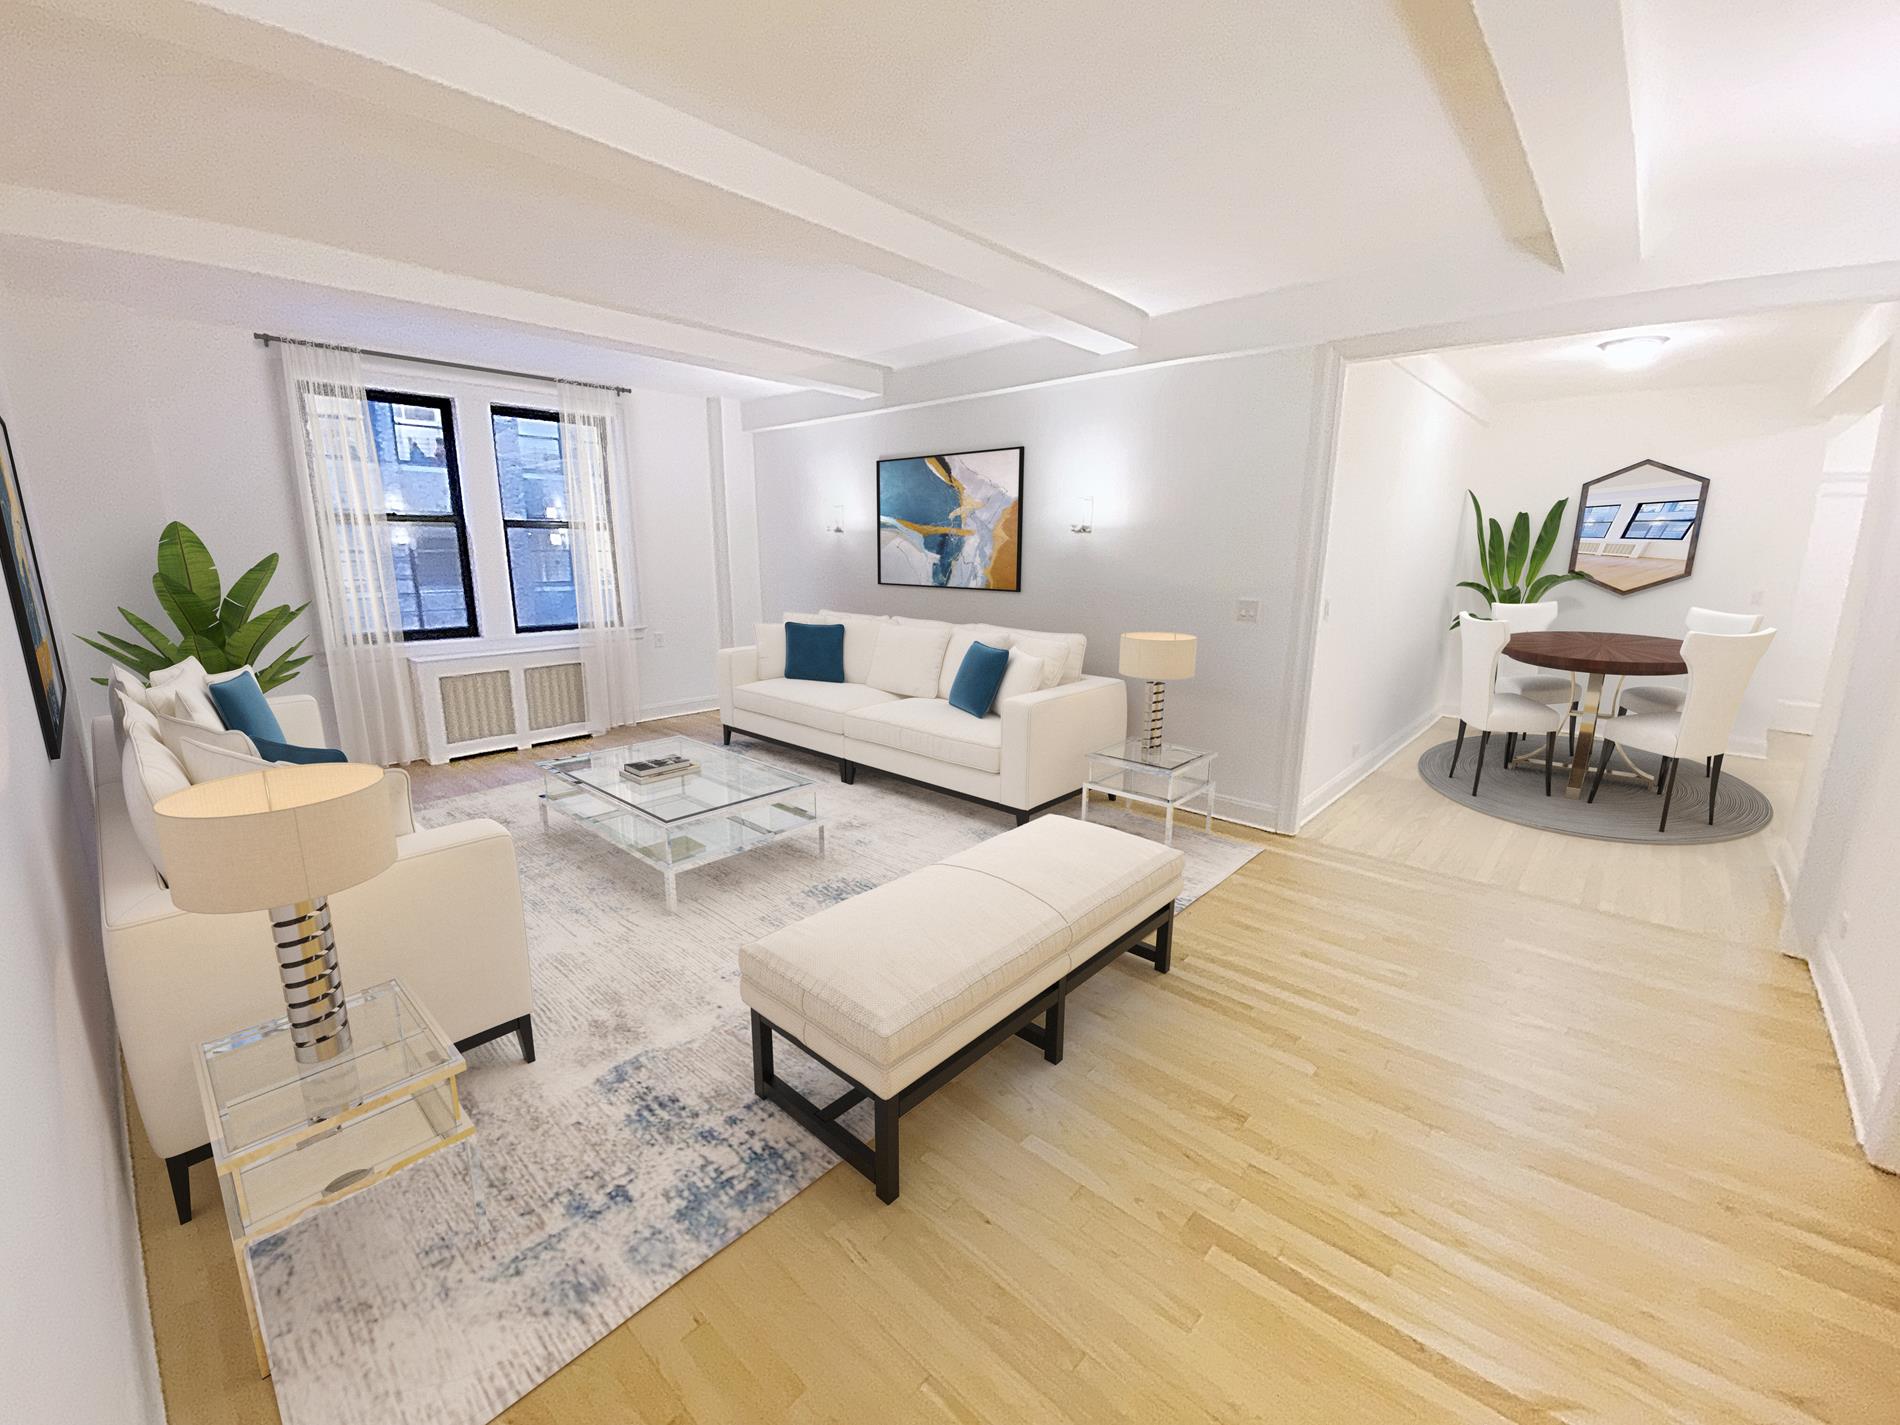 145 East 92nd Street 4-A, Carnegie Hill, Upper East Side, NYC - 3 Bedrooms  
2.5 Bathrooms  
6 Rooms - 